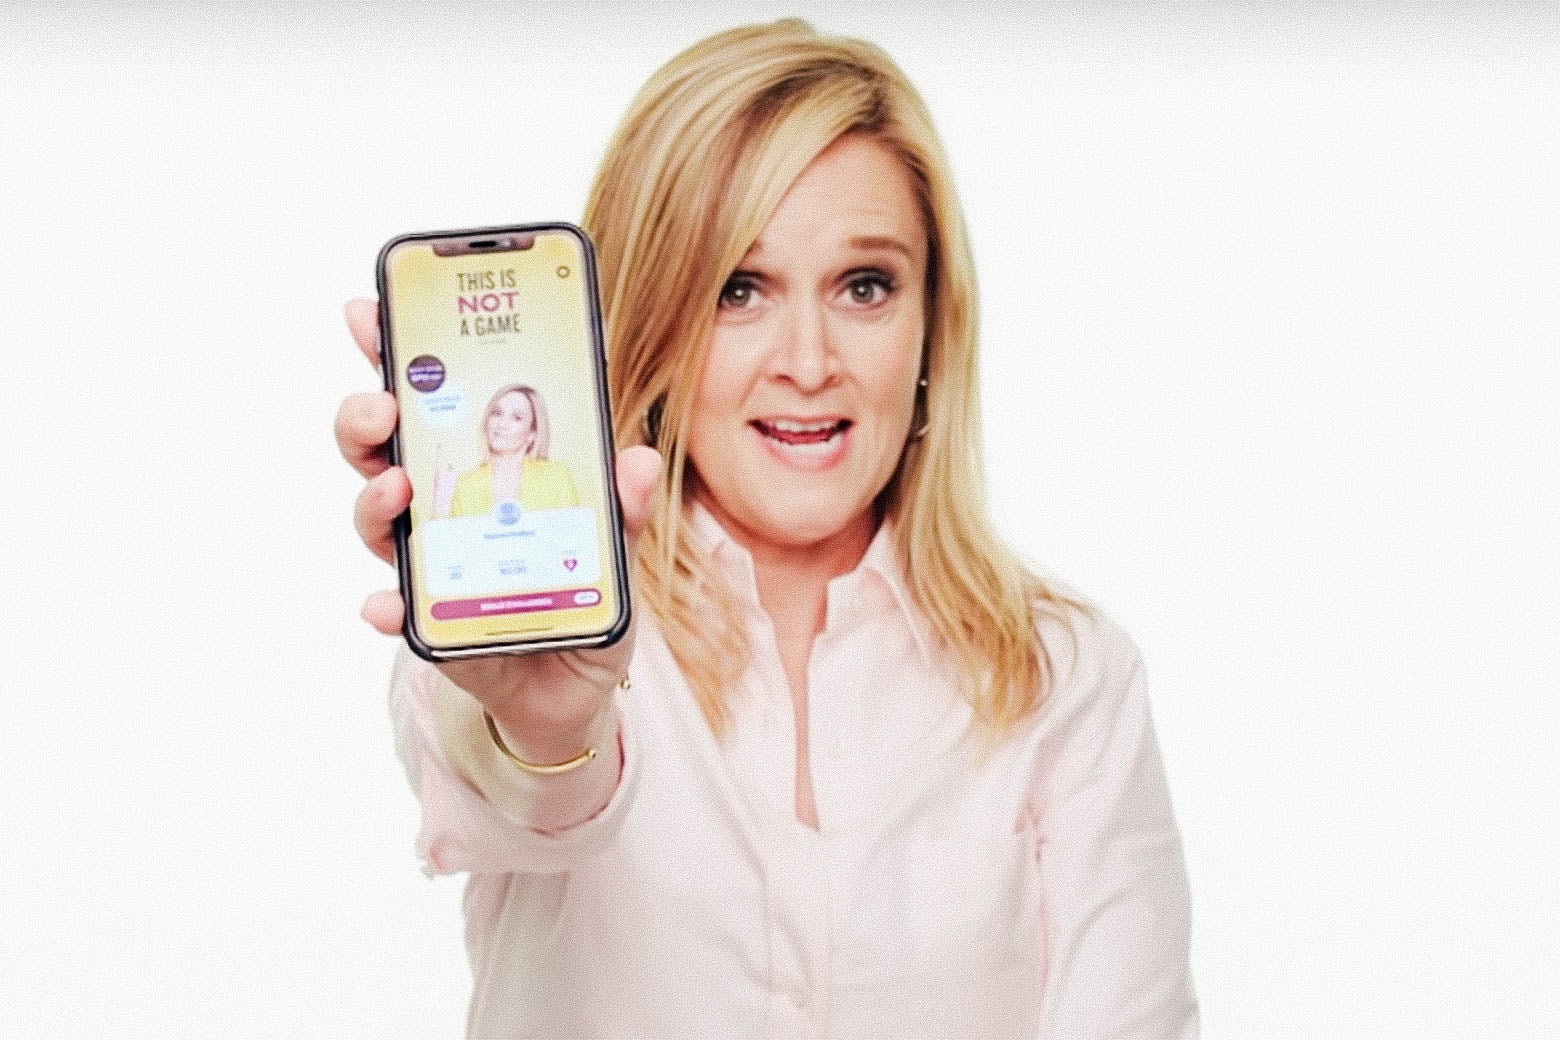 Midterm elections: Full Frontal's Samantha Bee introduces trivia app This Is Not a Game.